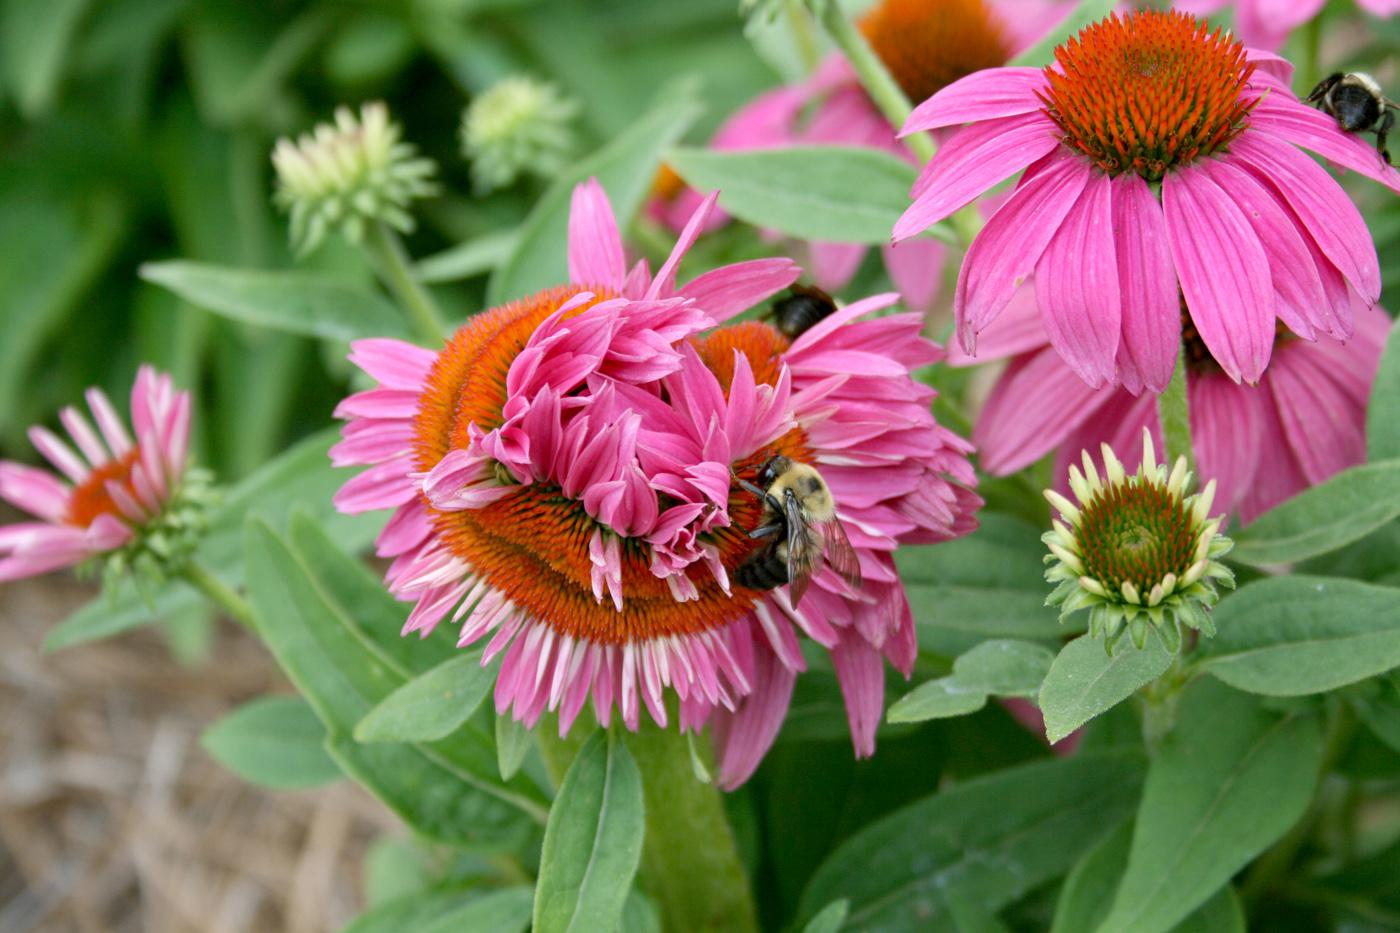 Fasciation is a mutation in plants that causes strange growth and development. This fasciated flower of Pow Wow Wild Berry coneflower displays contorted growth, while the flower on the right is normal. (Photo by Gary Bachman)